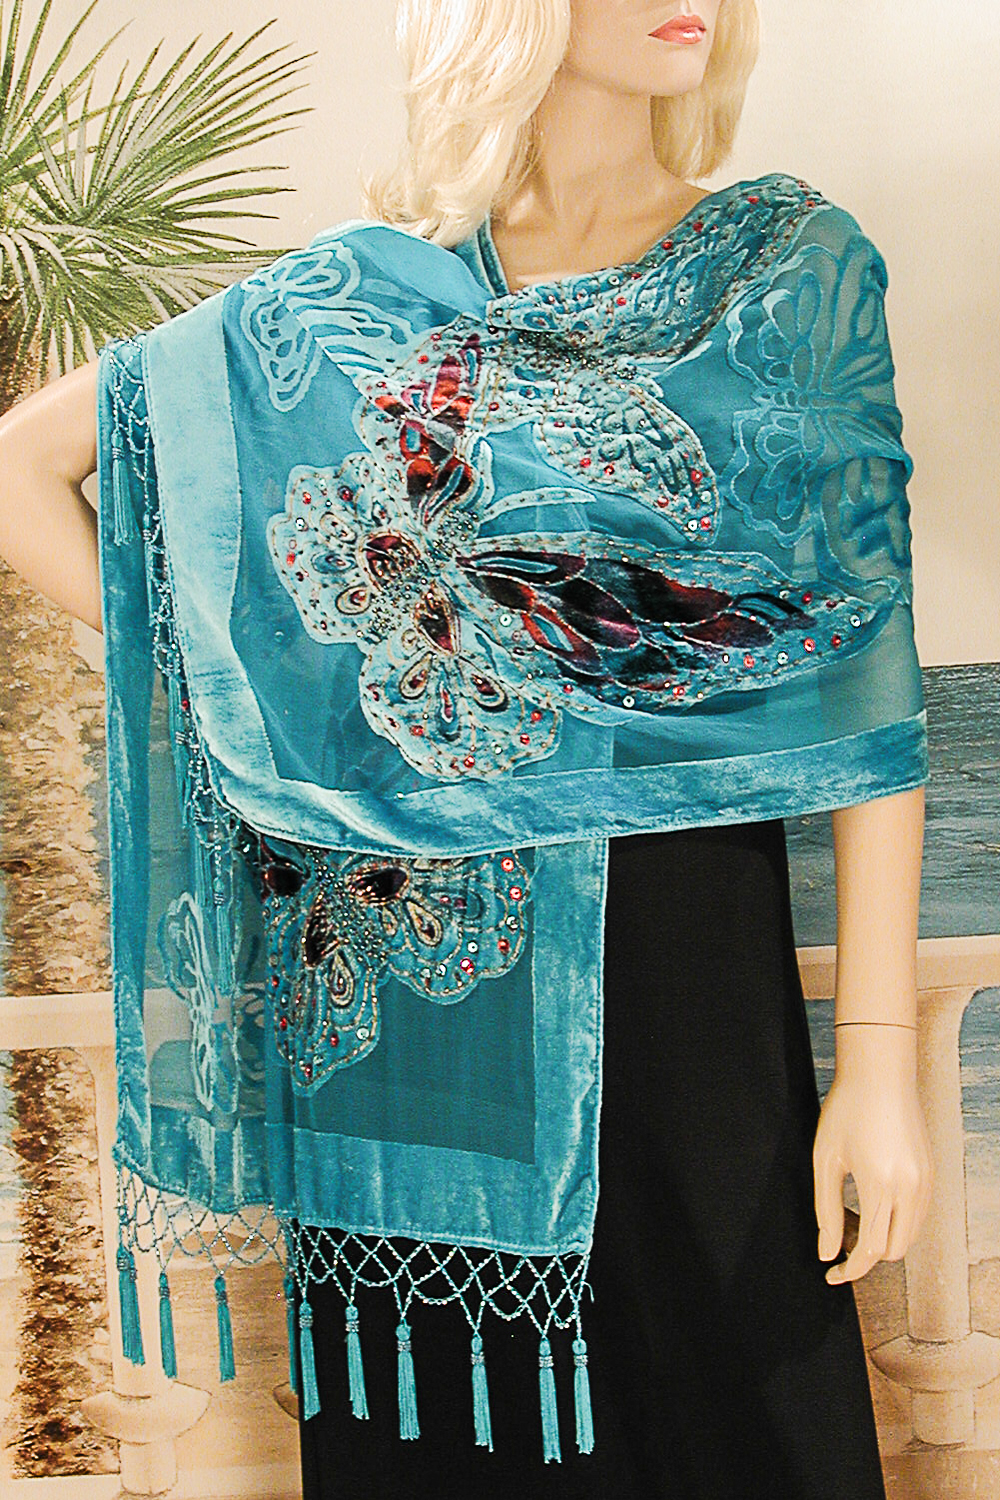 Large Velvet Oblong Shawl with Butterfly Design, a fashion accessorie - Evening Elegance